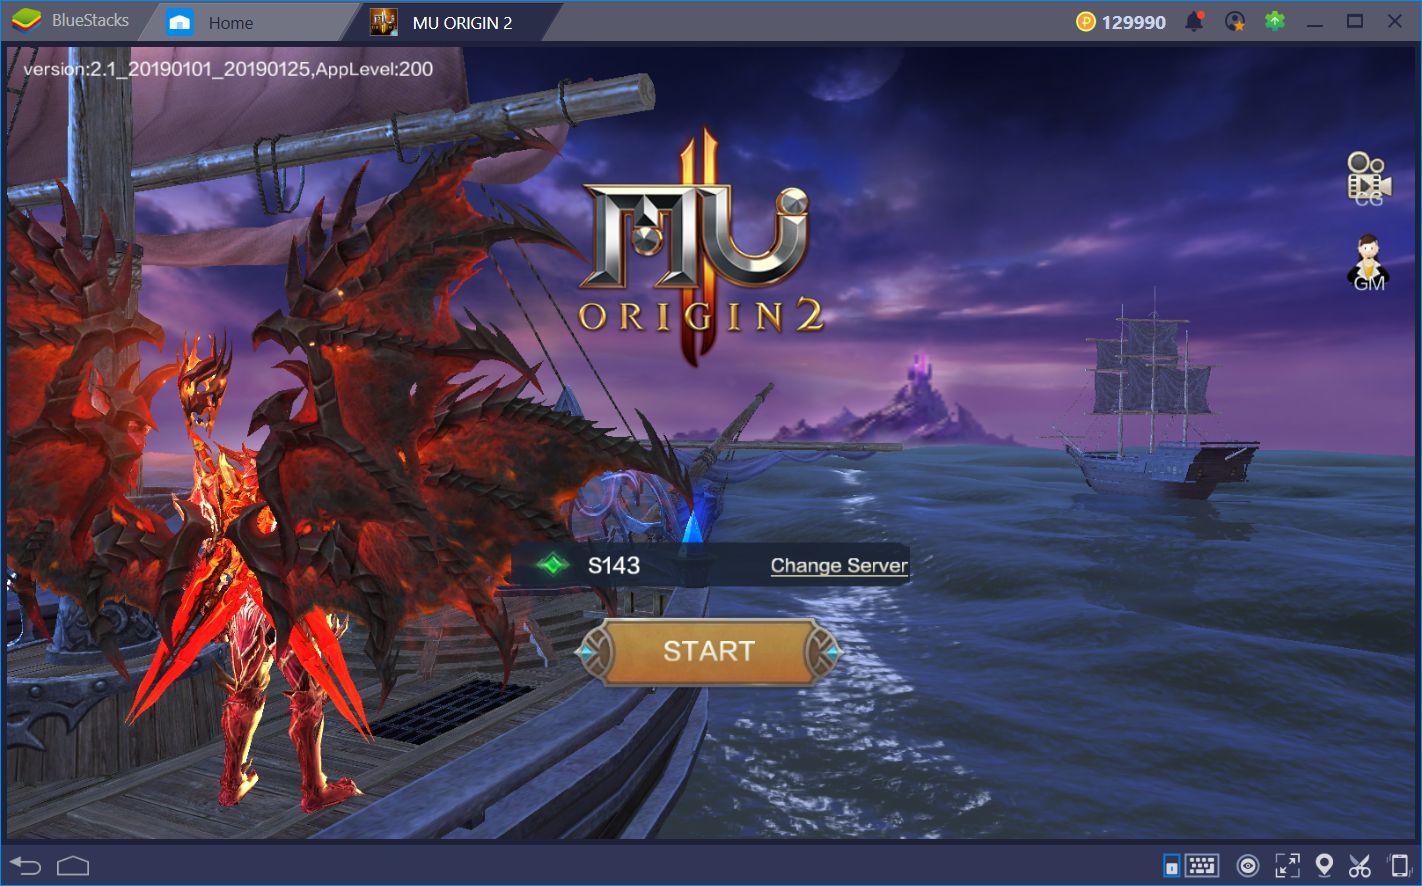 MU Origin 2—The Famous MMORPG Gets a New Look!